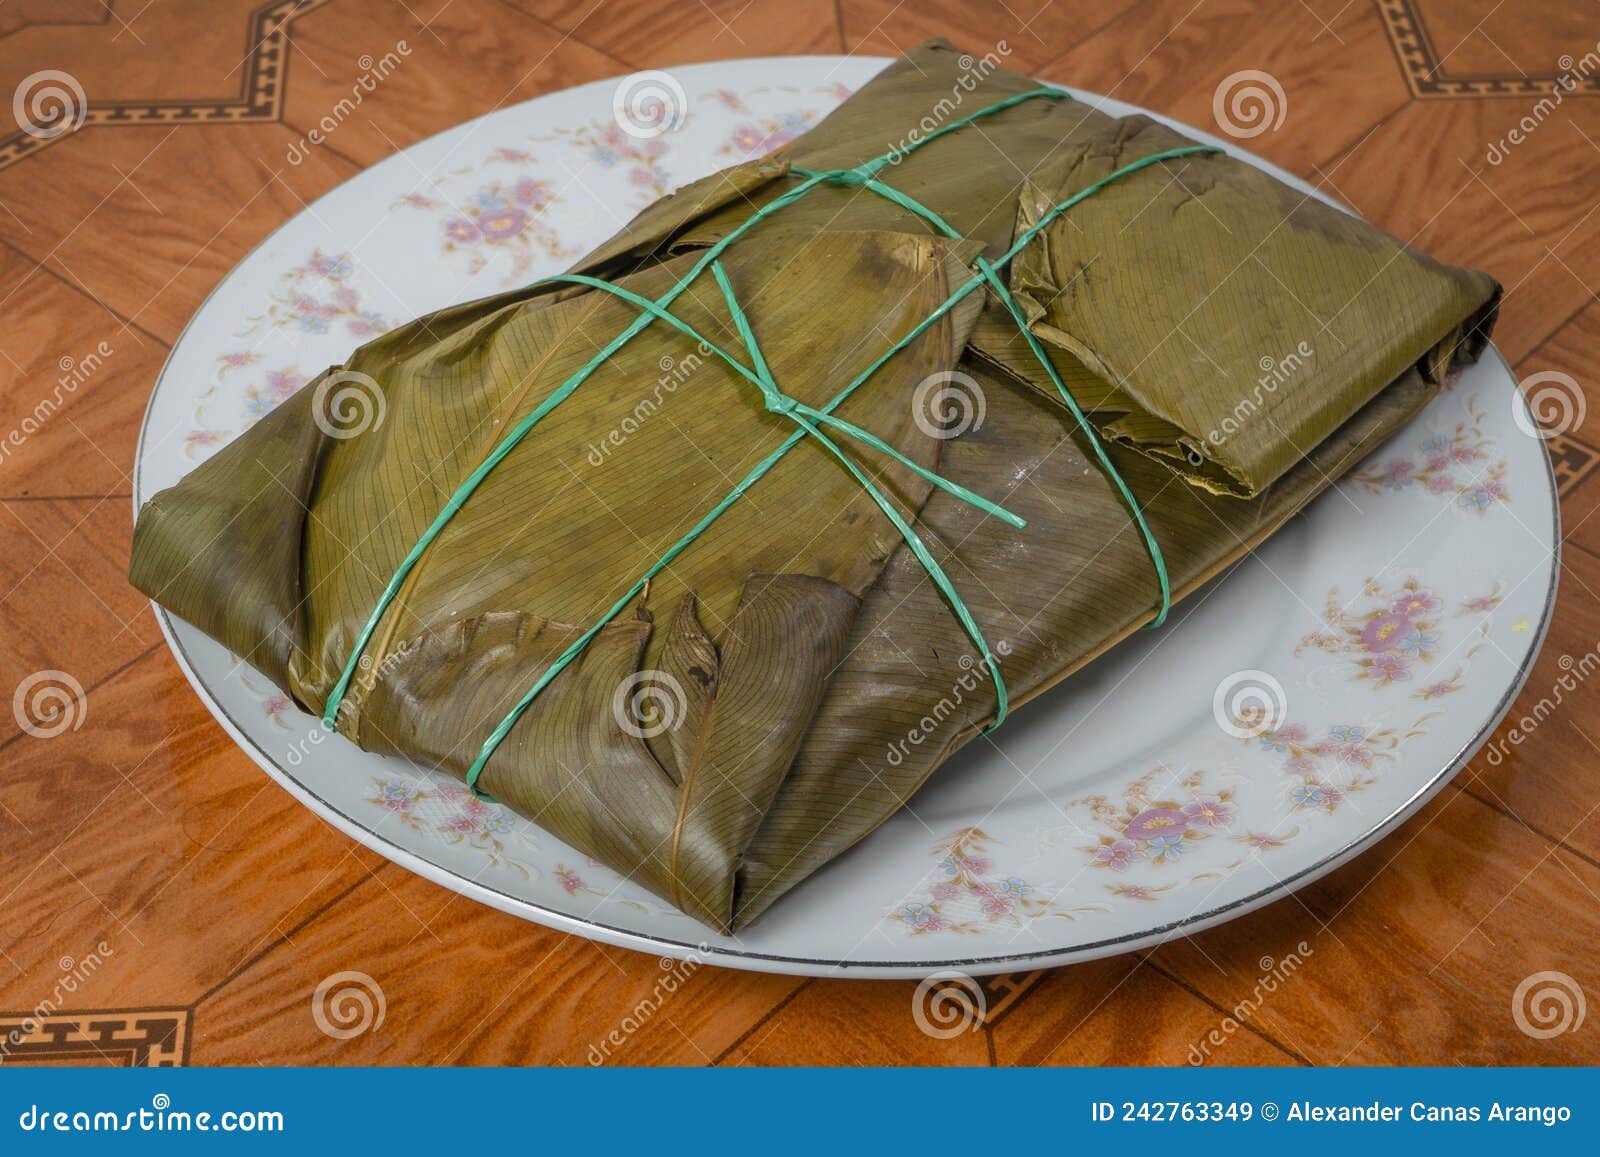 colombian tamale recipe with steamed banana leaves